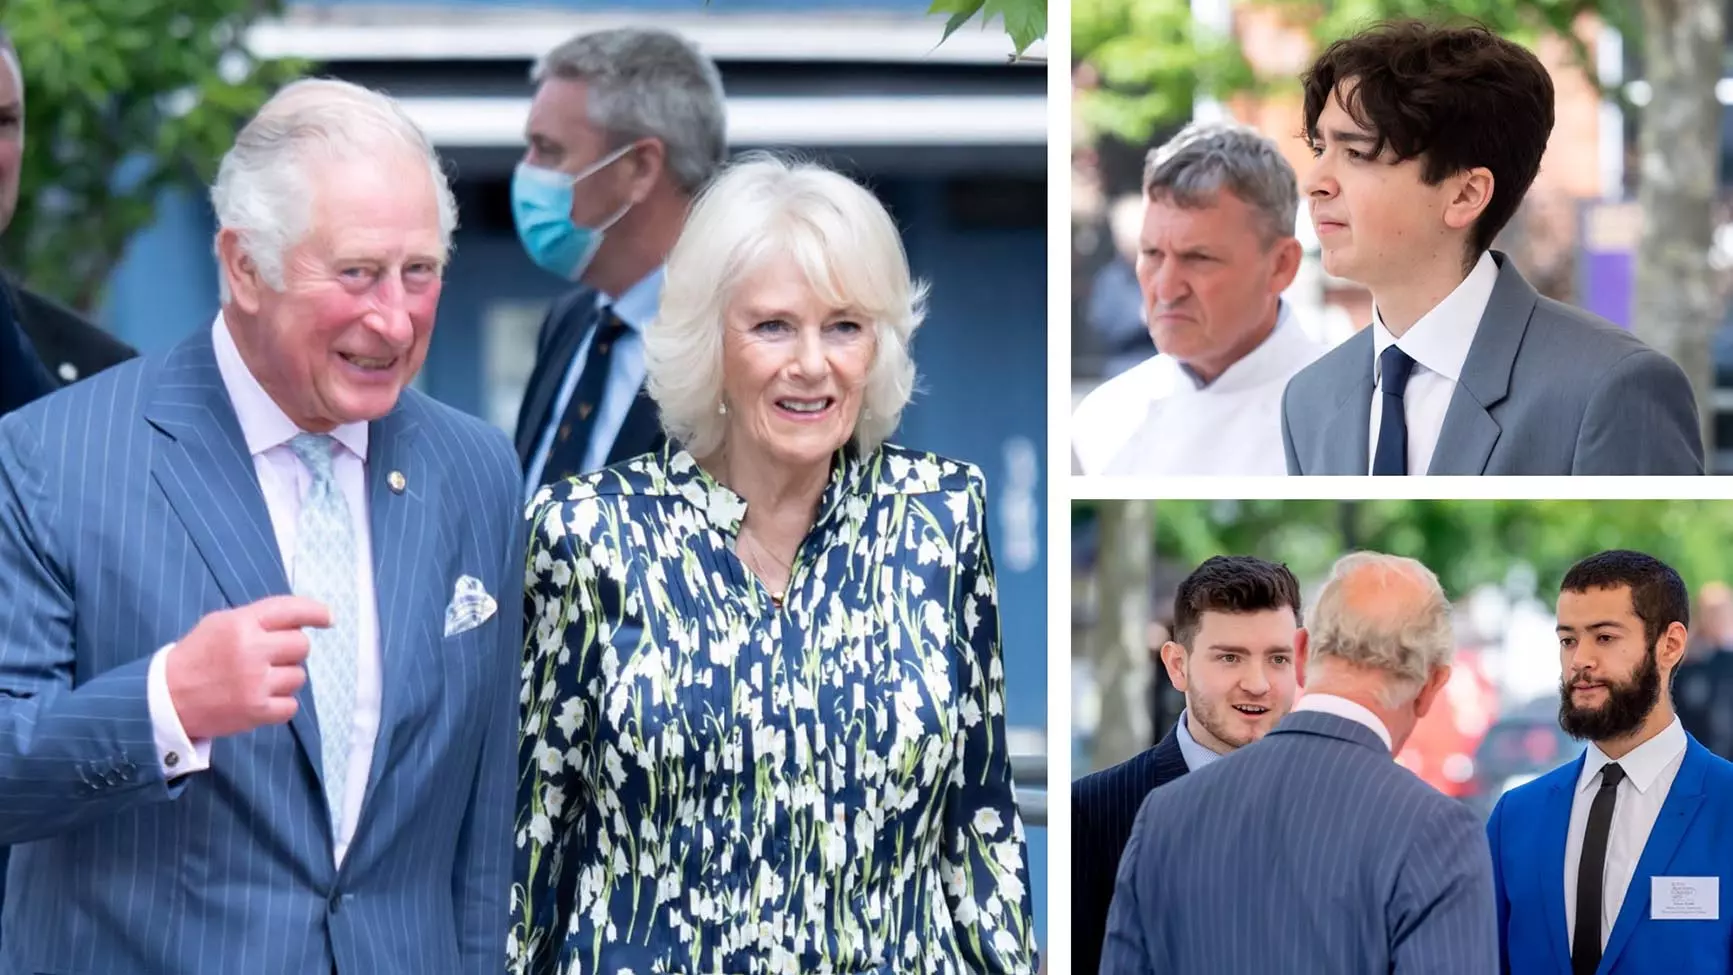 Apprentice chefs honoured to meet Charles and Camilla at Anniversary celebrations